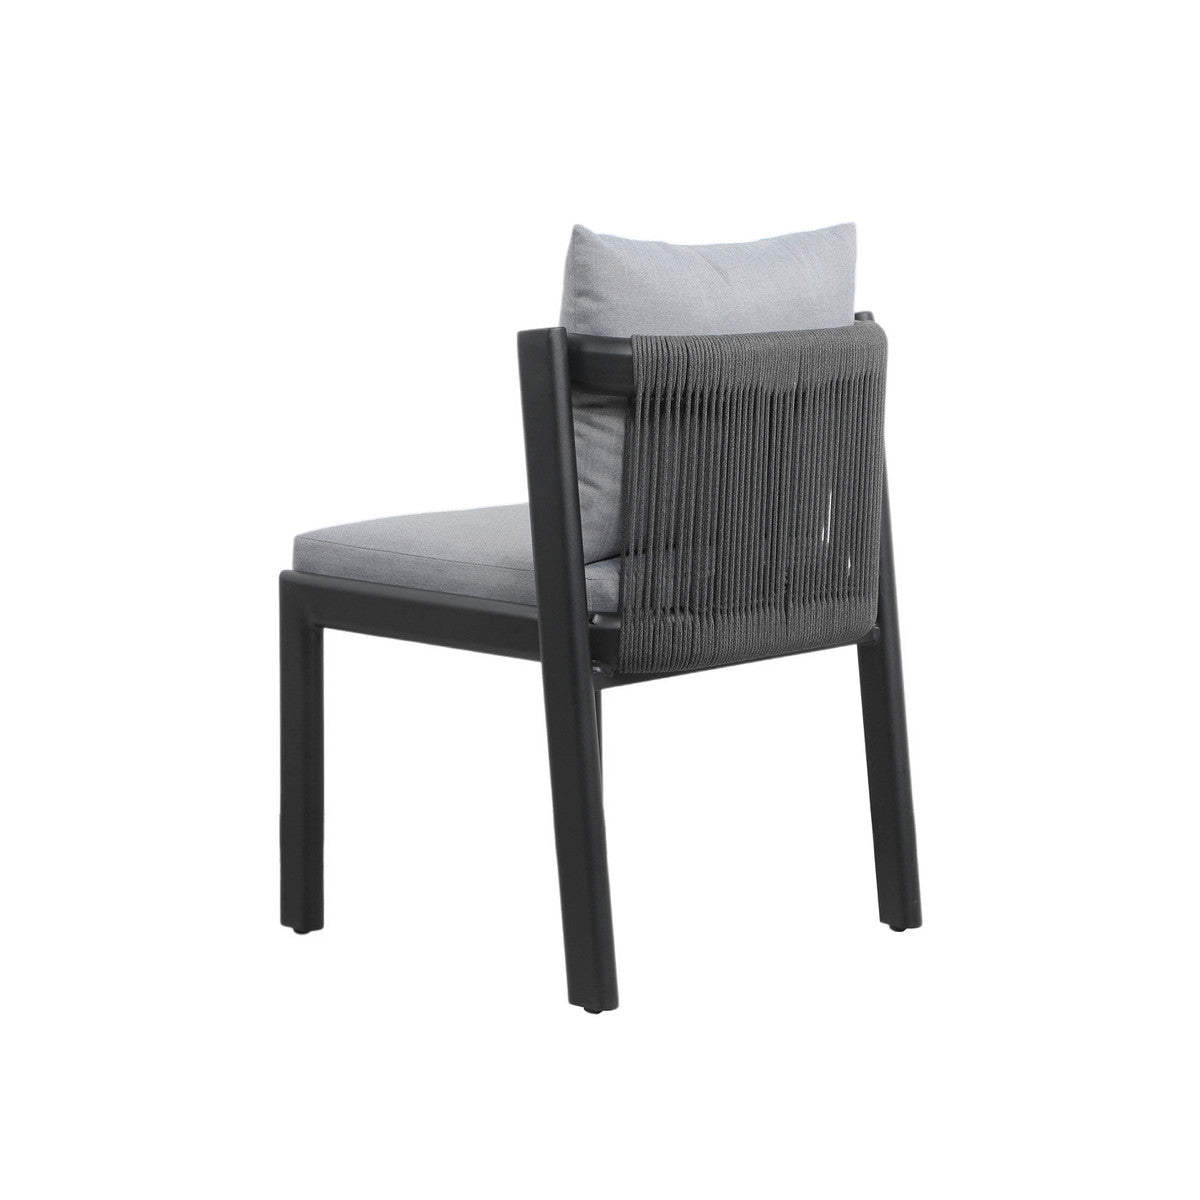 Anar Grey Outdoor Dining Chair